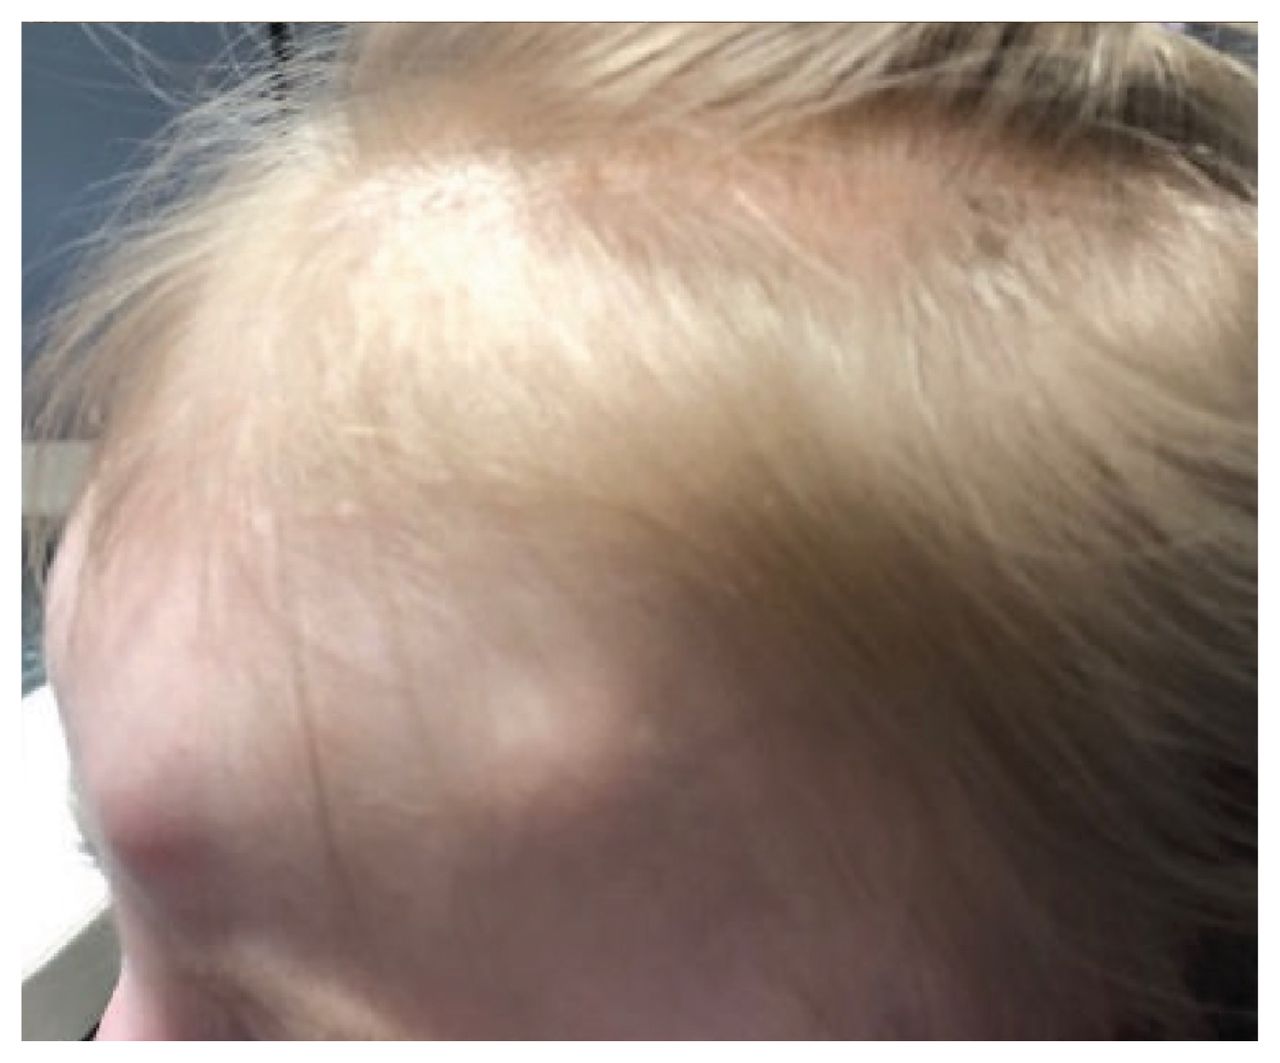 Rapidly enlarging scalp nodules in a 20-month-old child | CMAJ